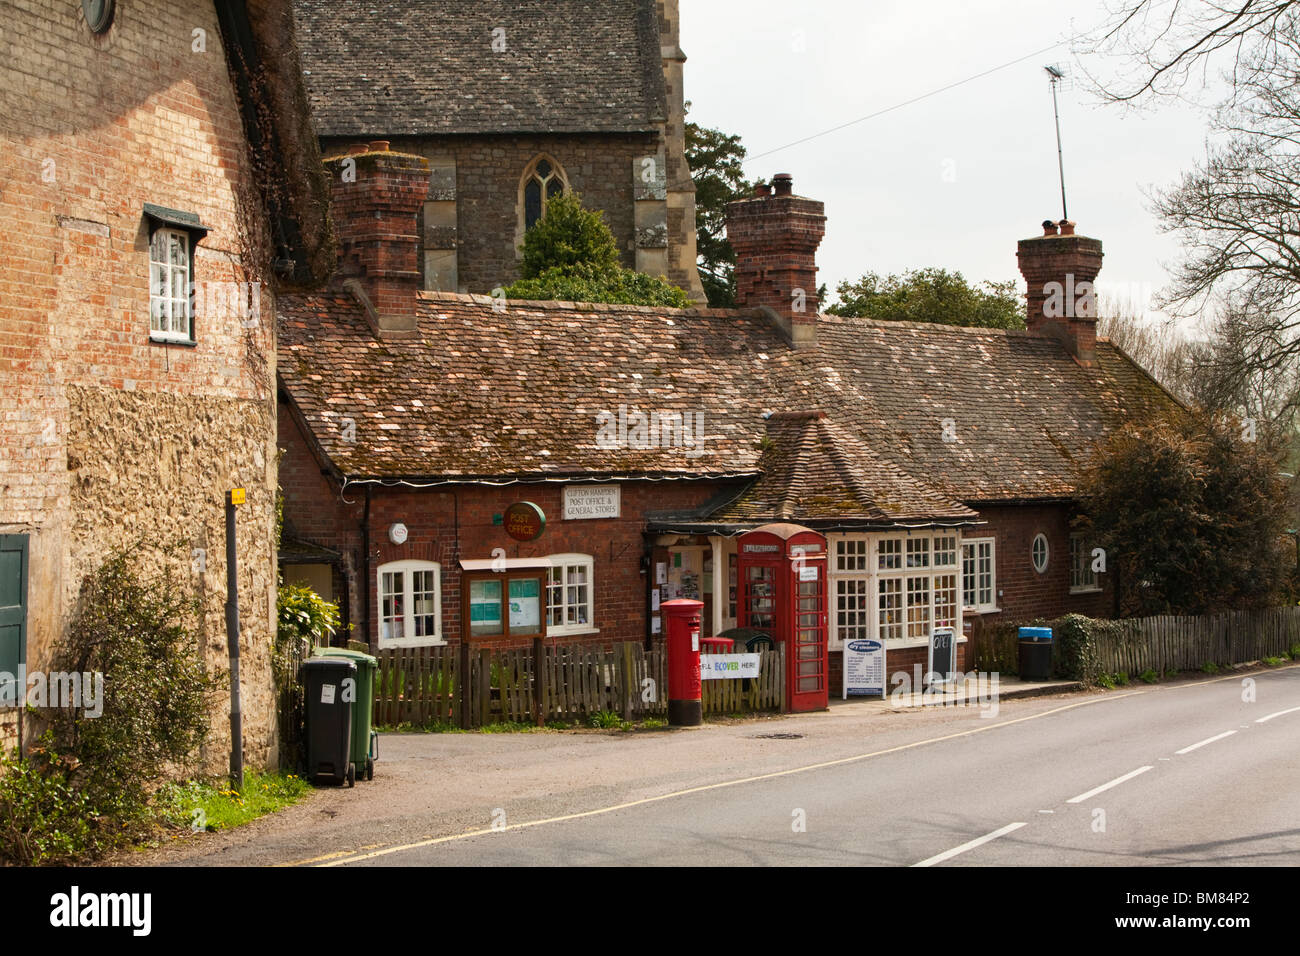 The Post Office in the centre of the Thameside village of Clifton Hampden, Oxfordshire, Uk Stock Photo